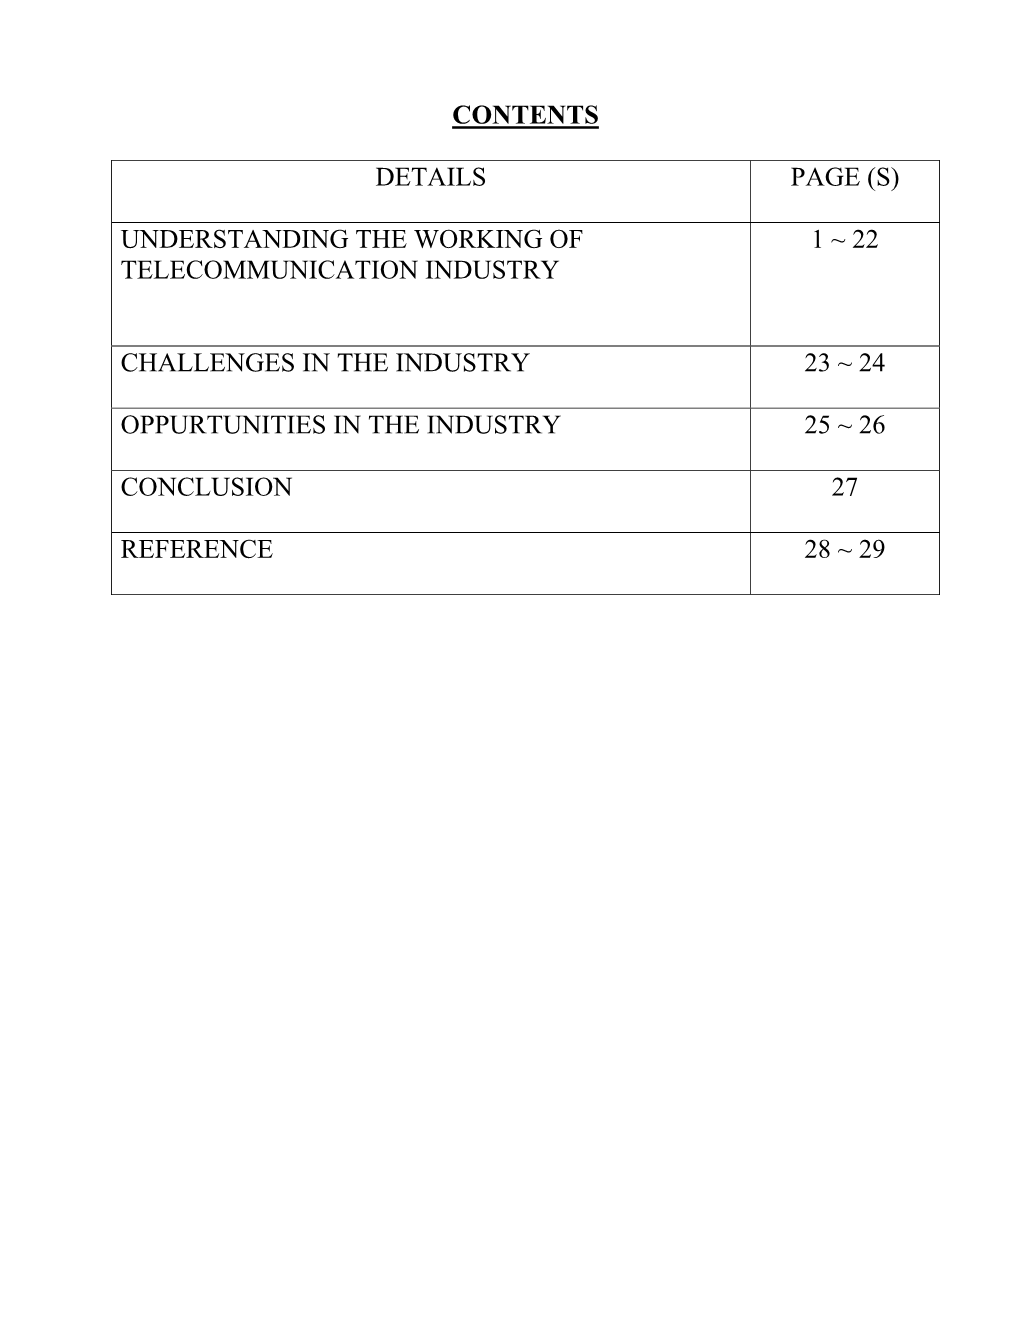 Contents Details Page (S) Understanding the Working of Telecommunication Industry 1 ~ 22 Challenges in the Industry 23 ~ 24 Oppu